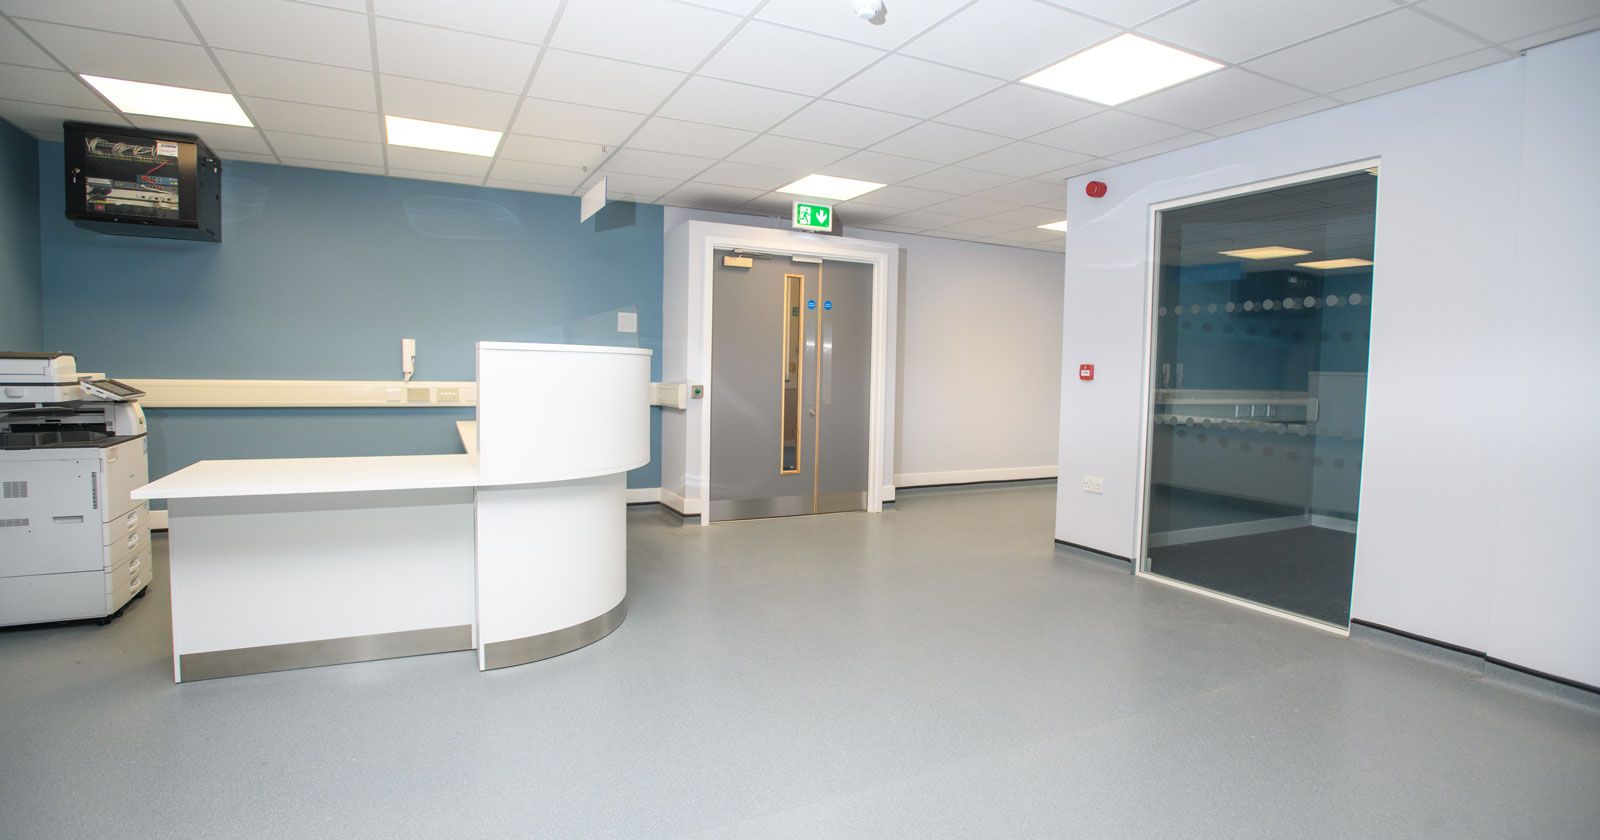 Queensgate Medical Centre Reception Area Finished to HMT63 Regulation Standard by APSS